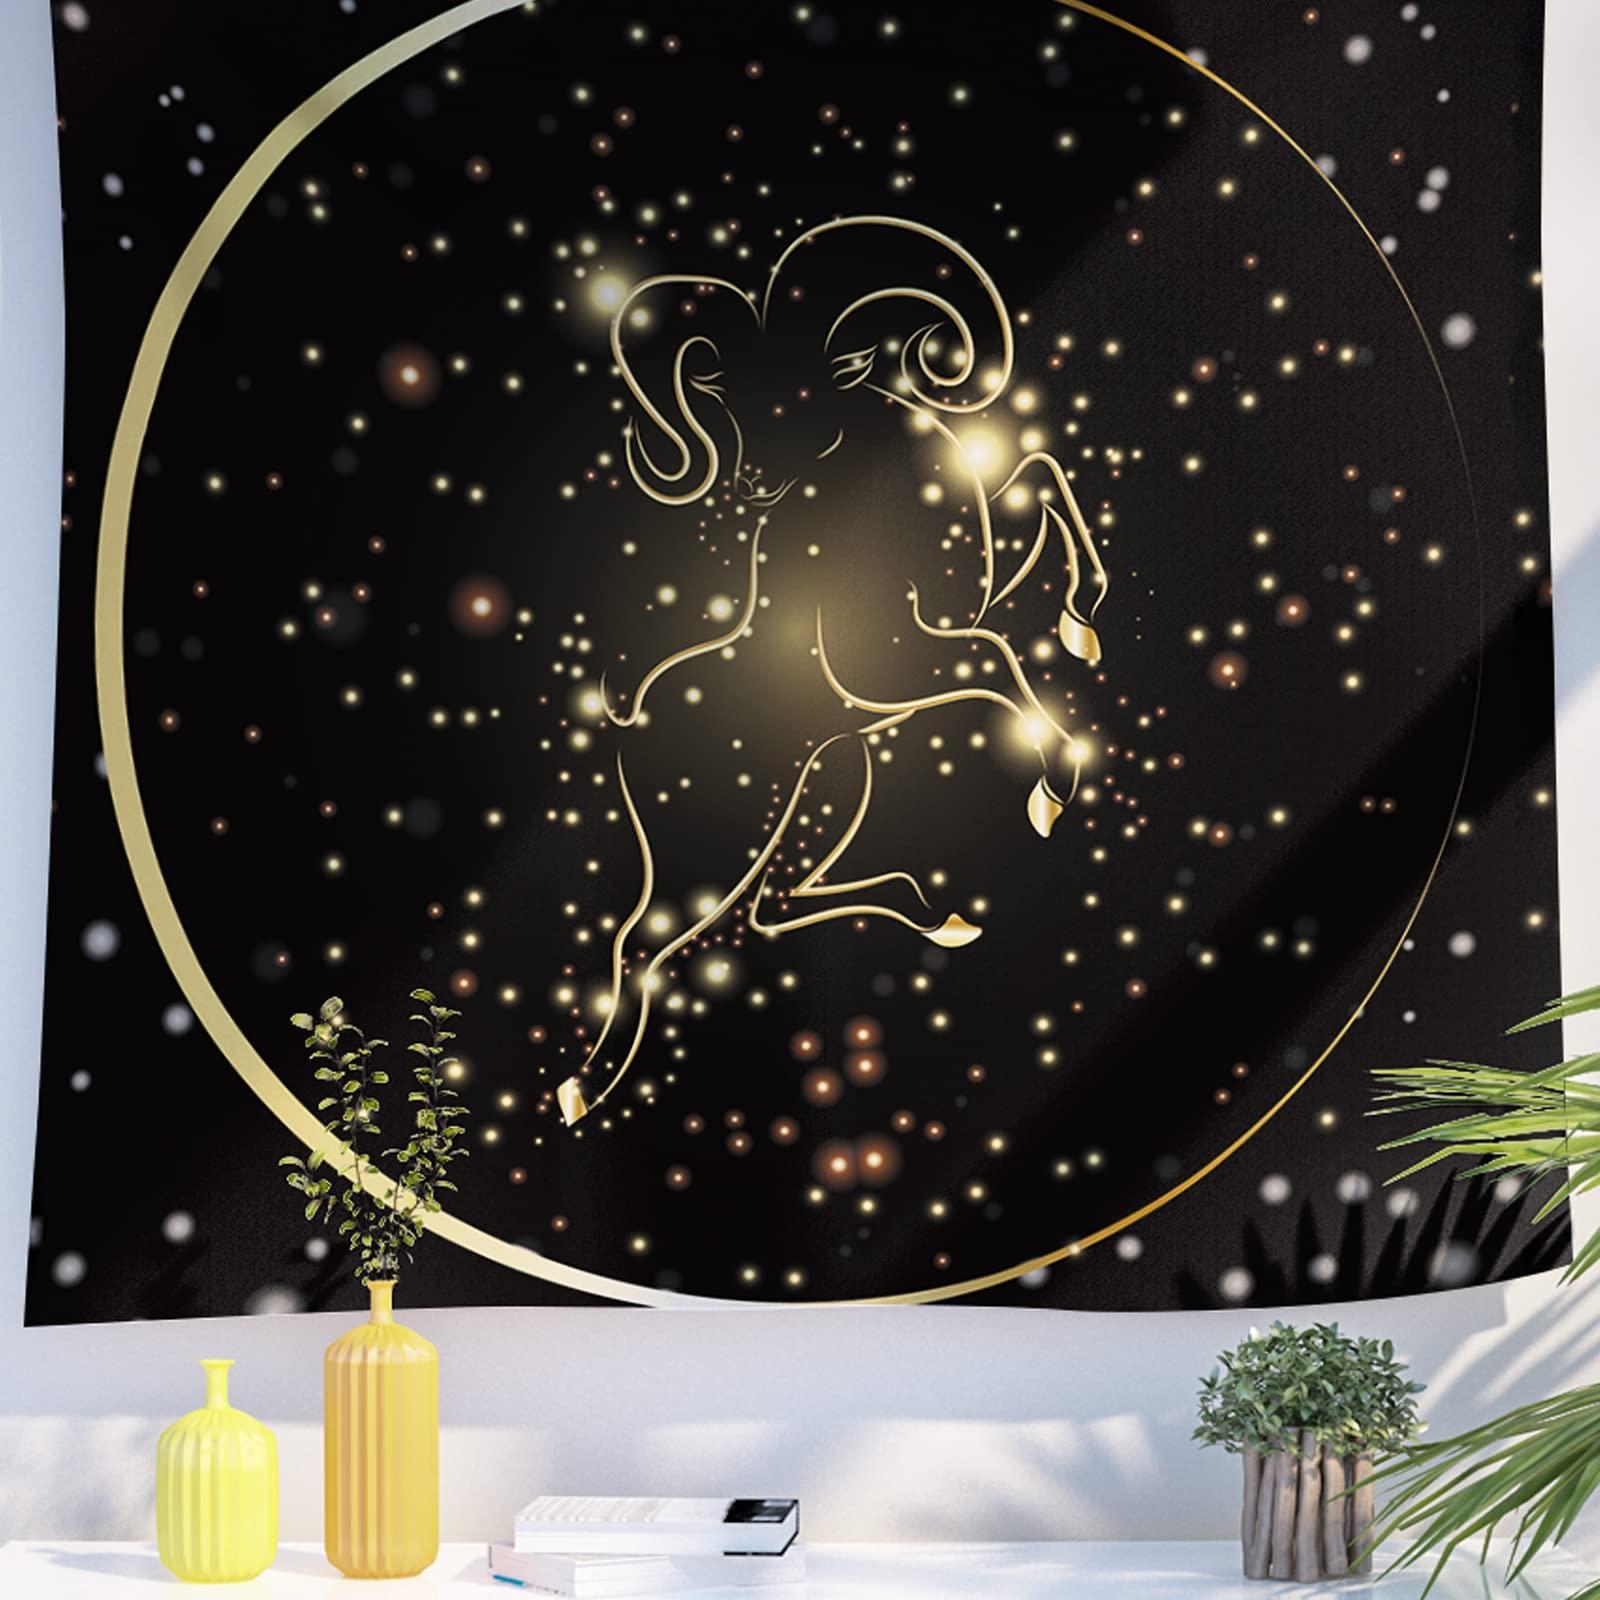 Berkin Arts Decor Tapestry for Wall Hanging Premium Polyester Fabric Backdrop Space Art Goddess Art flowing golden scarf Twinkling Spiral Nebula 51.2 x 59.1 Inch